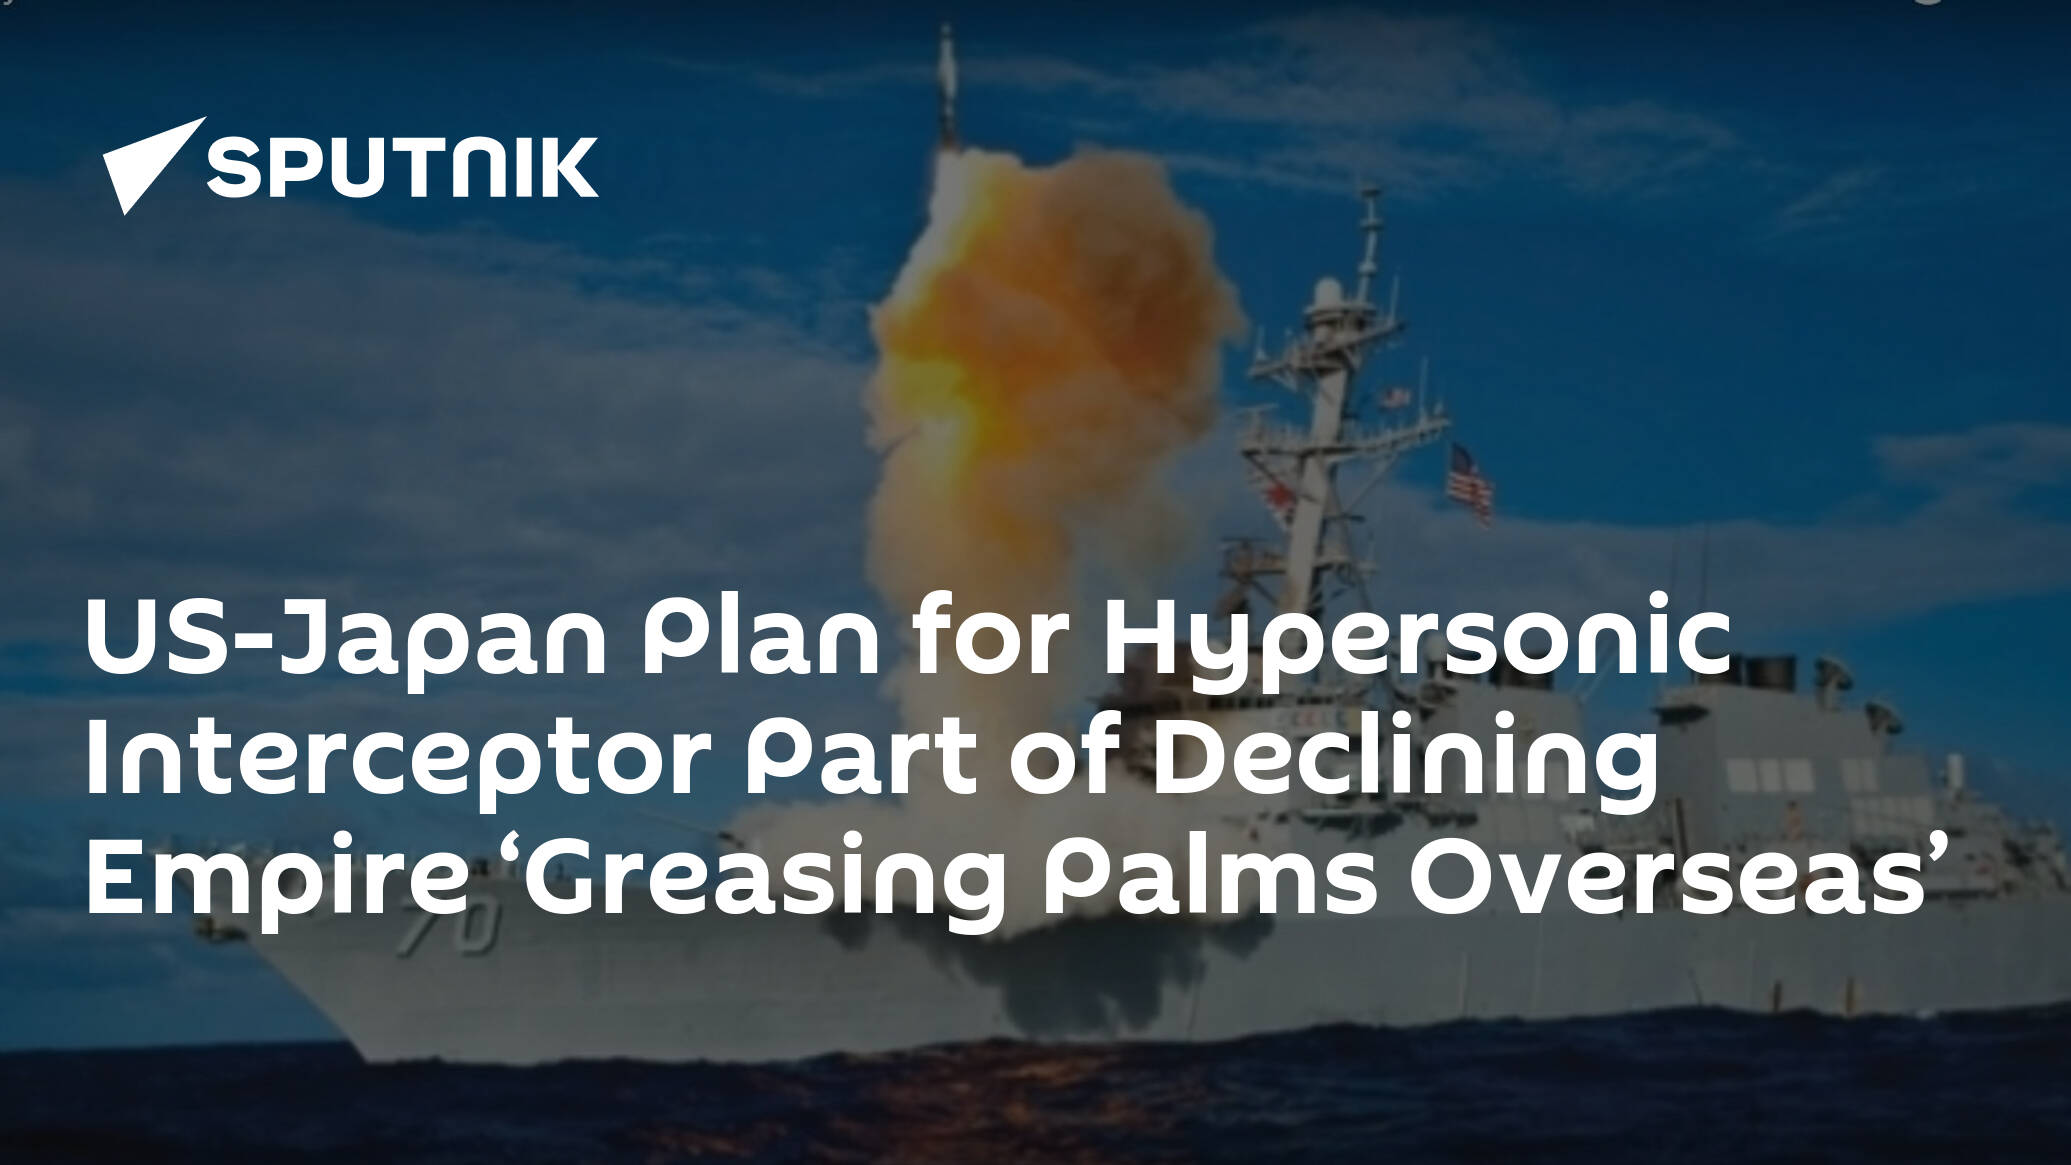 US-Japan Plan for Hypersonic Interceptor Part of Declining Empire ‘Greasing Palms Overseas’